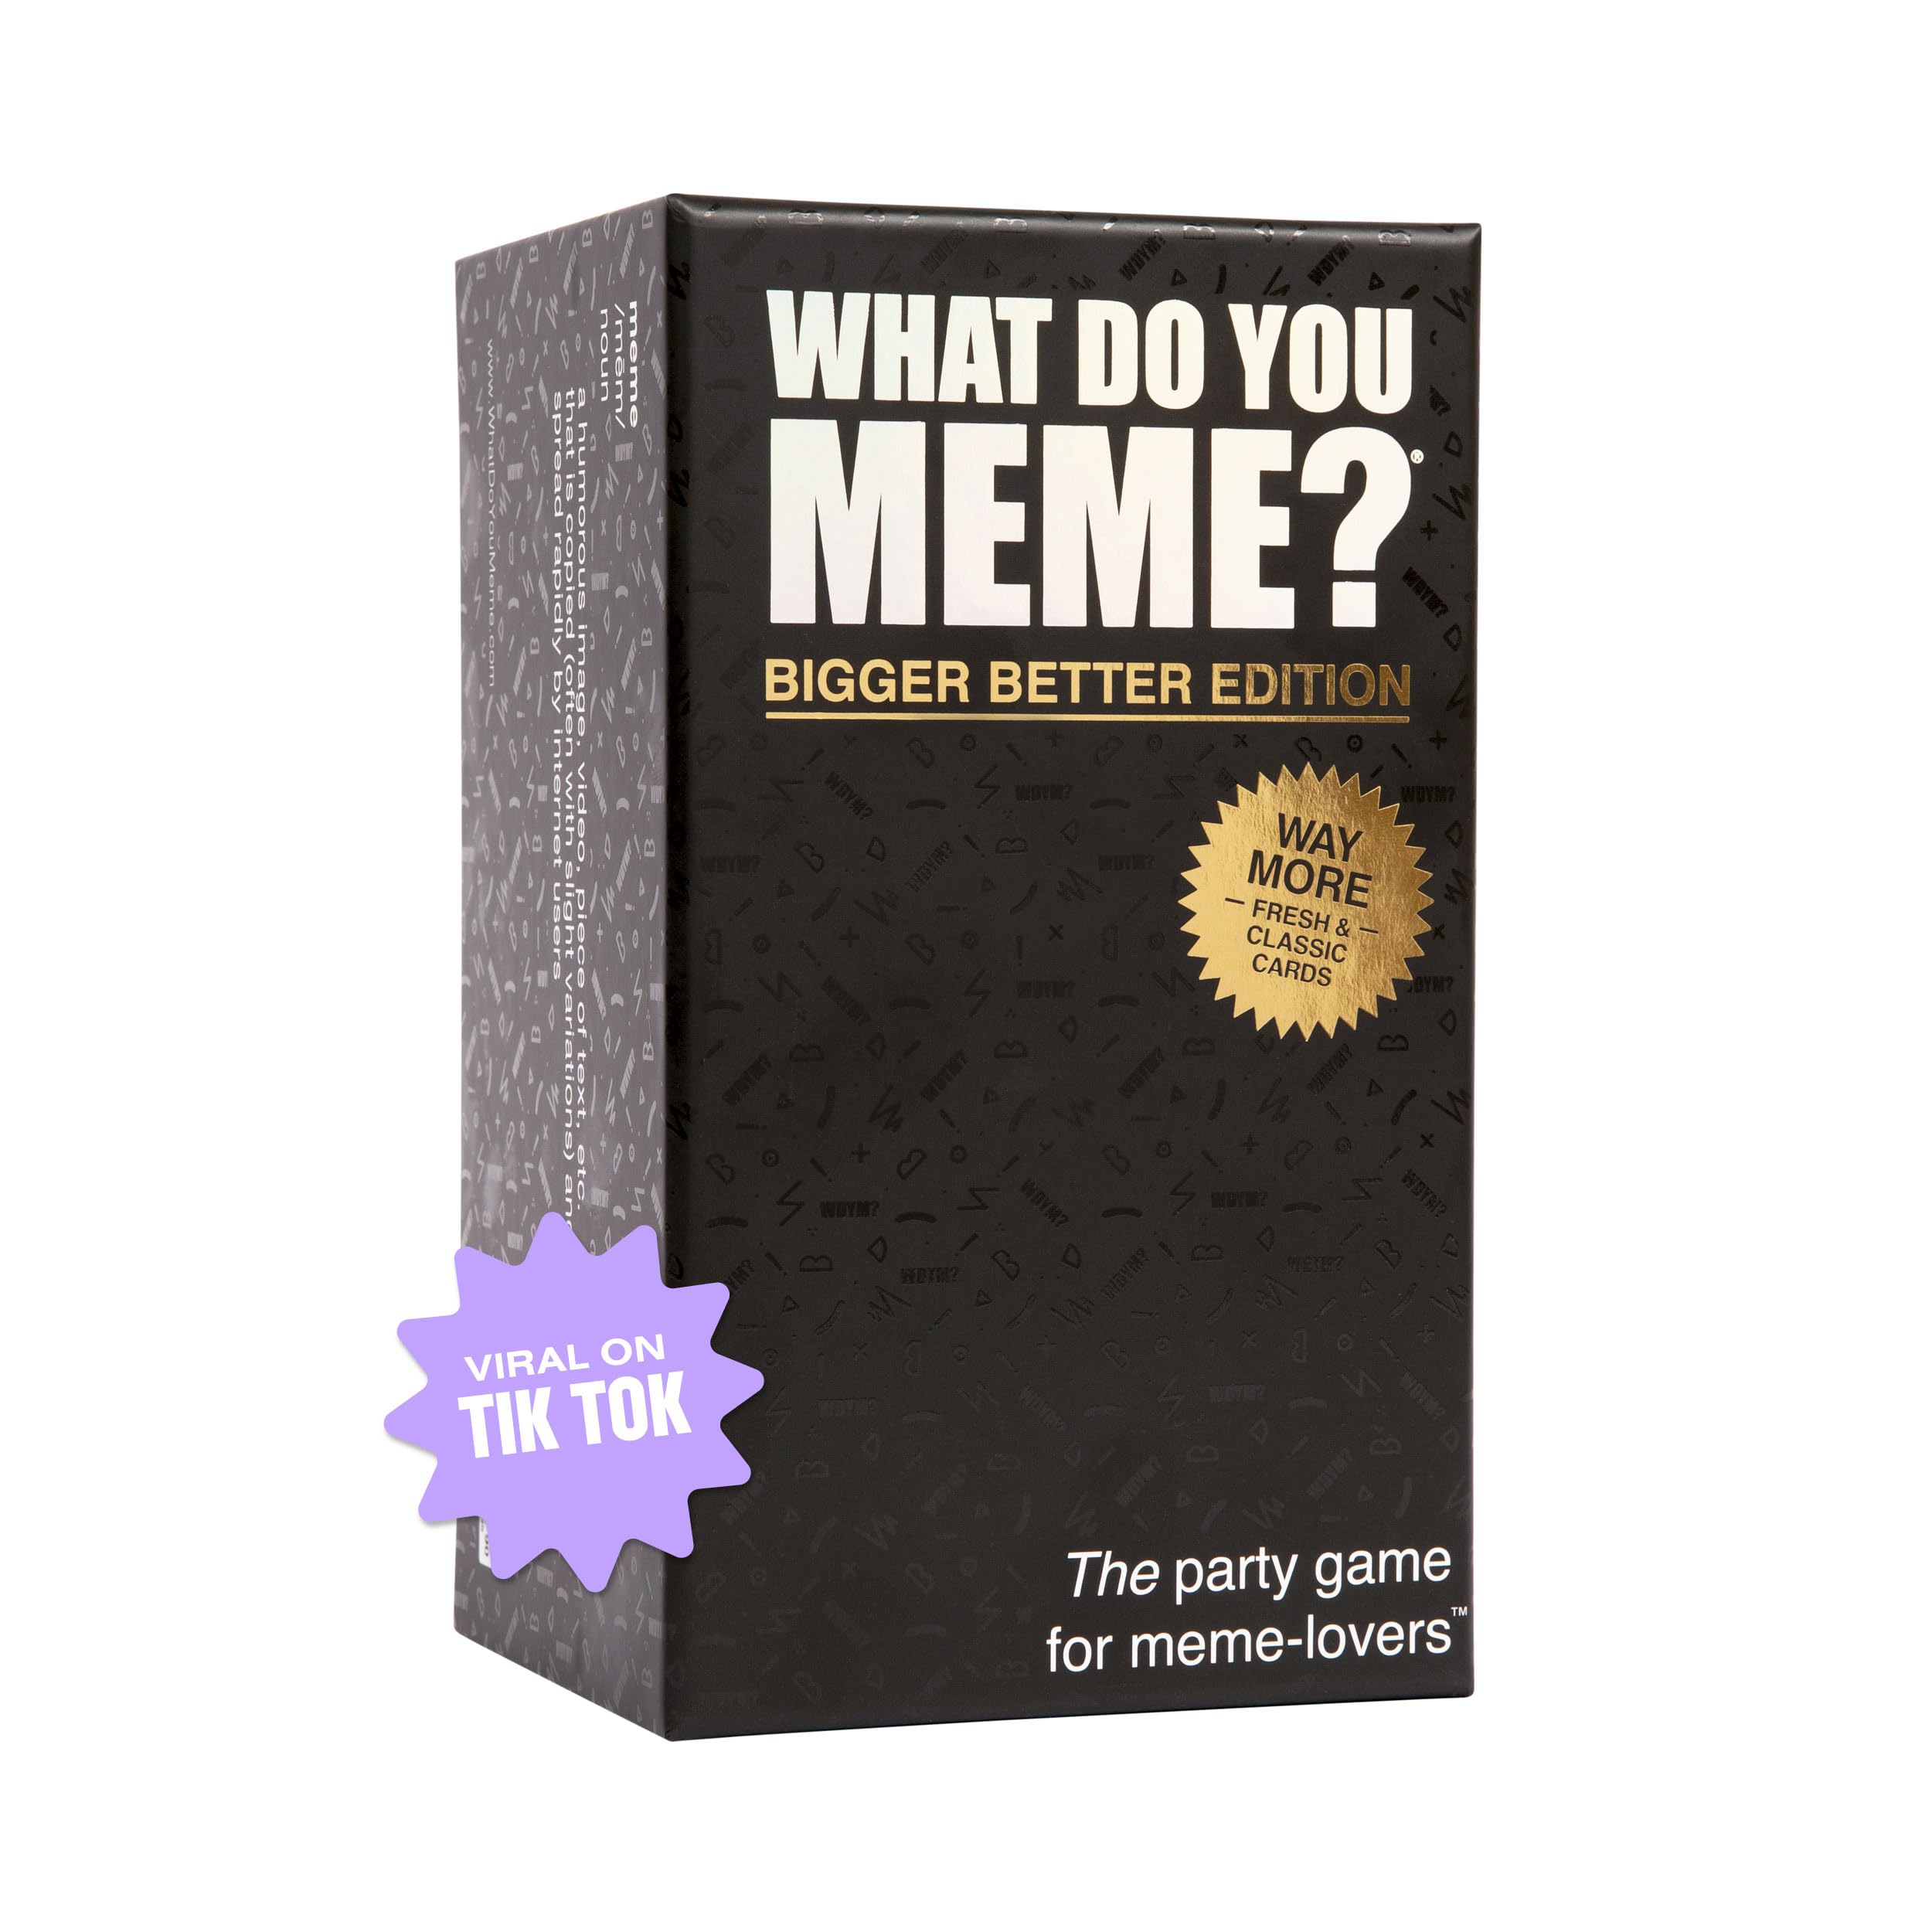 $19.64: WHAT DO YOU MEME? Bigger Better Edition